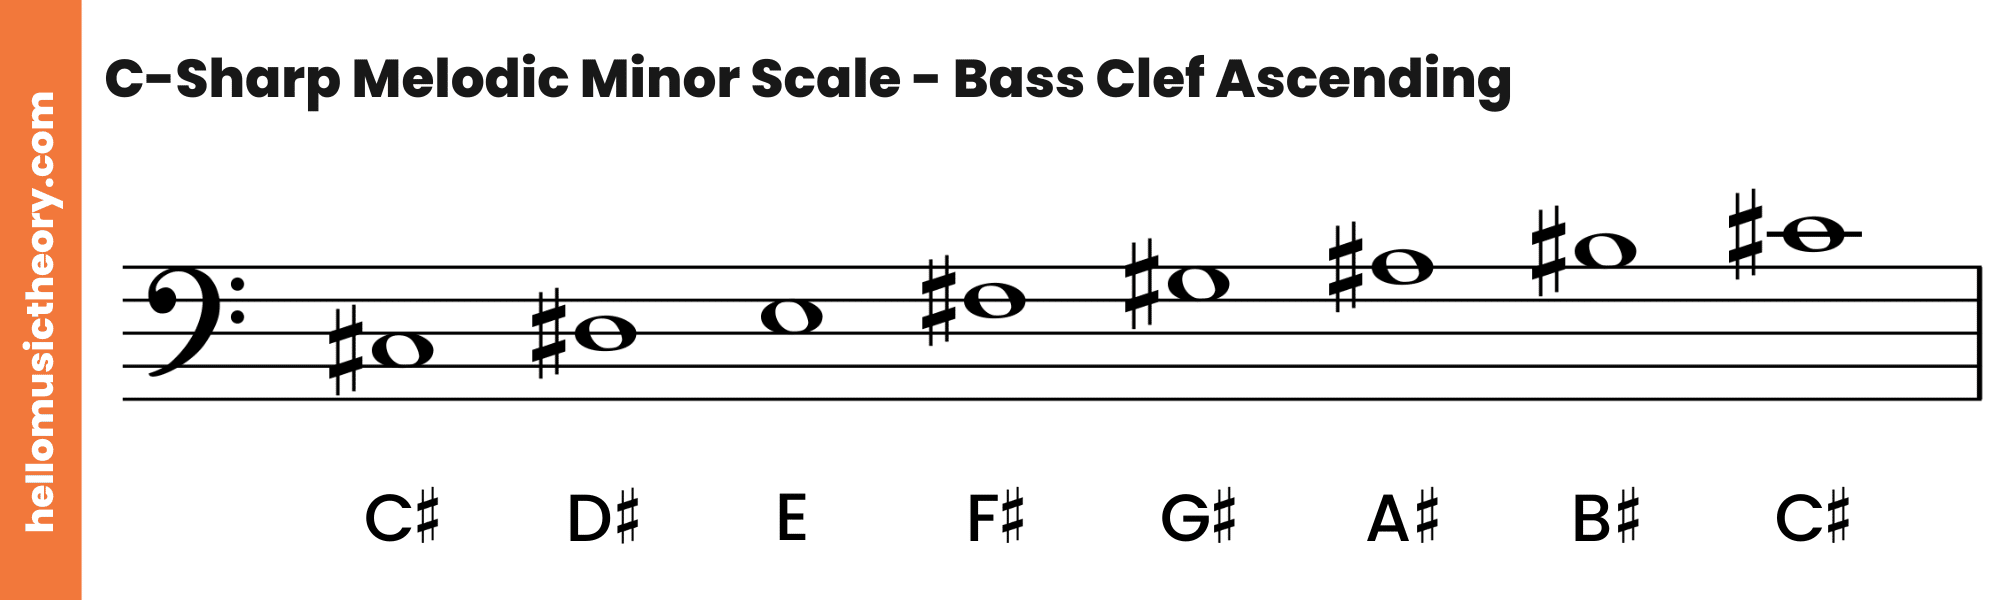 C-Sharp Melodic Minor Scale Bass Clef Ascending